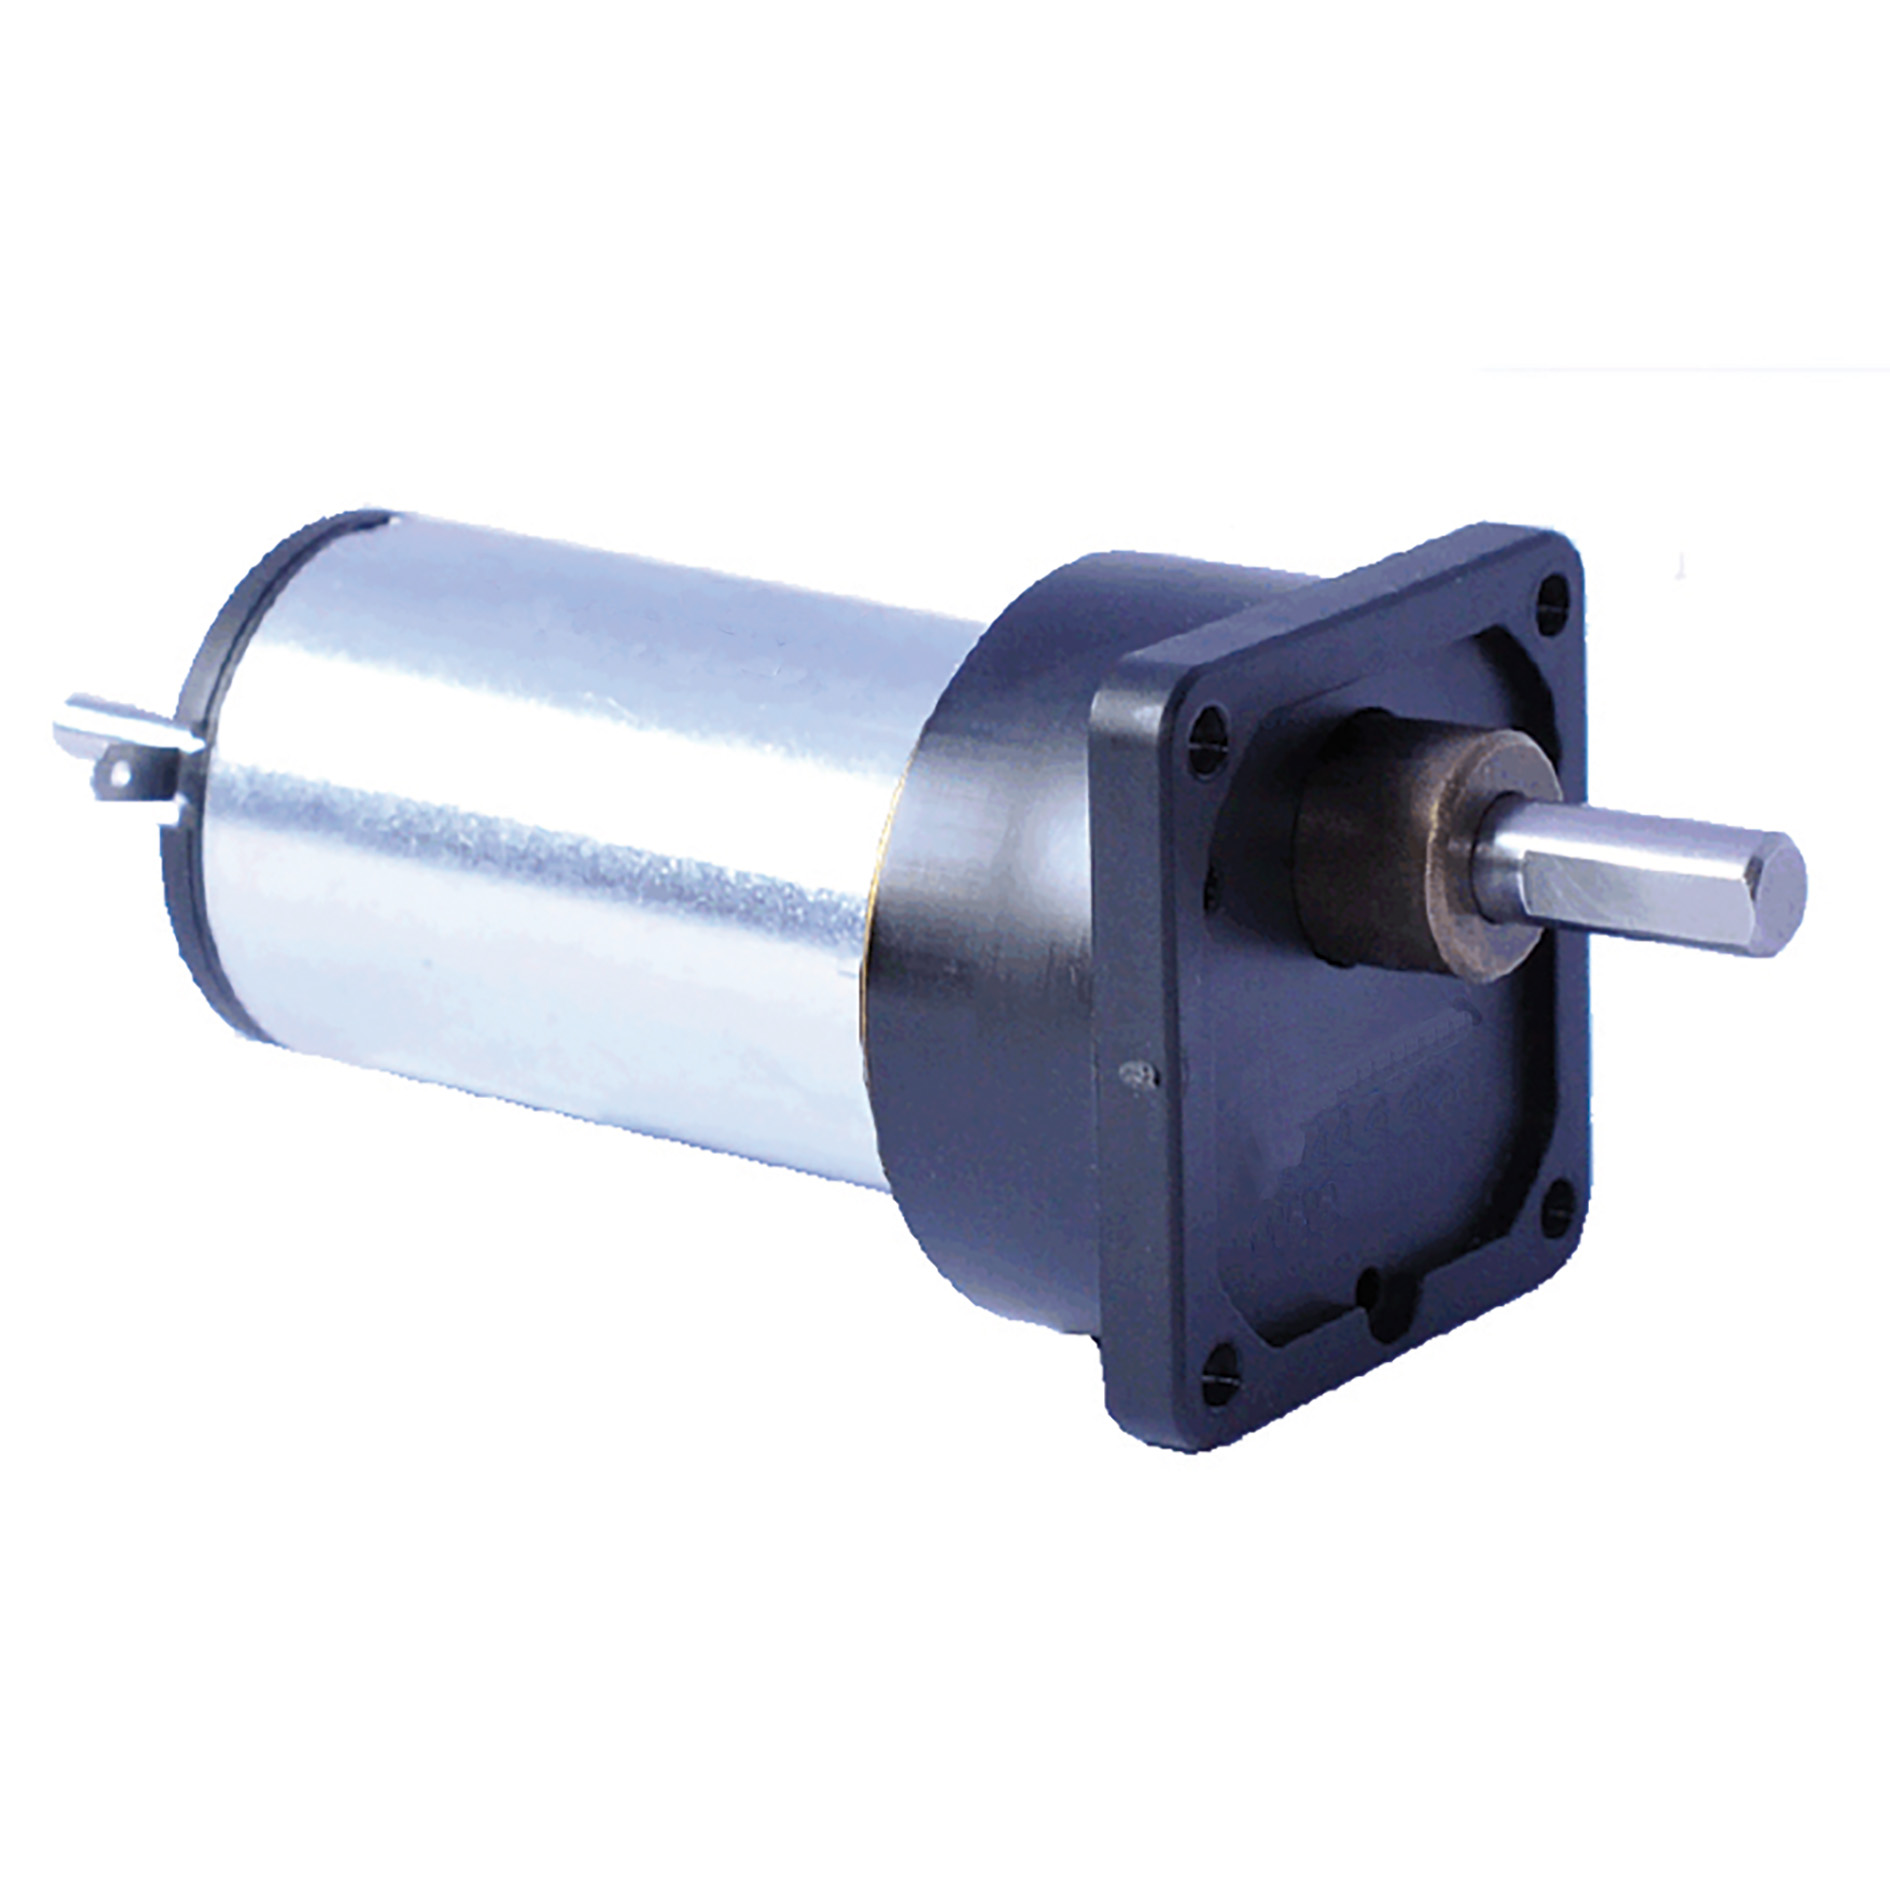 Motor-gearbox 12V and 24V DC - from 0,075 to 0,6Nm - 12 V DC - 